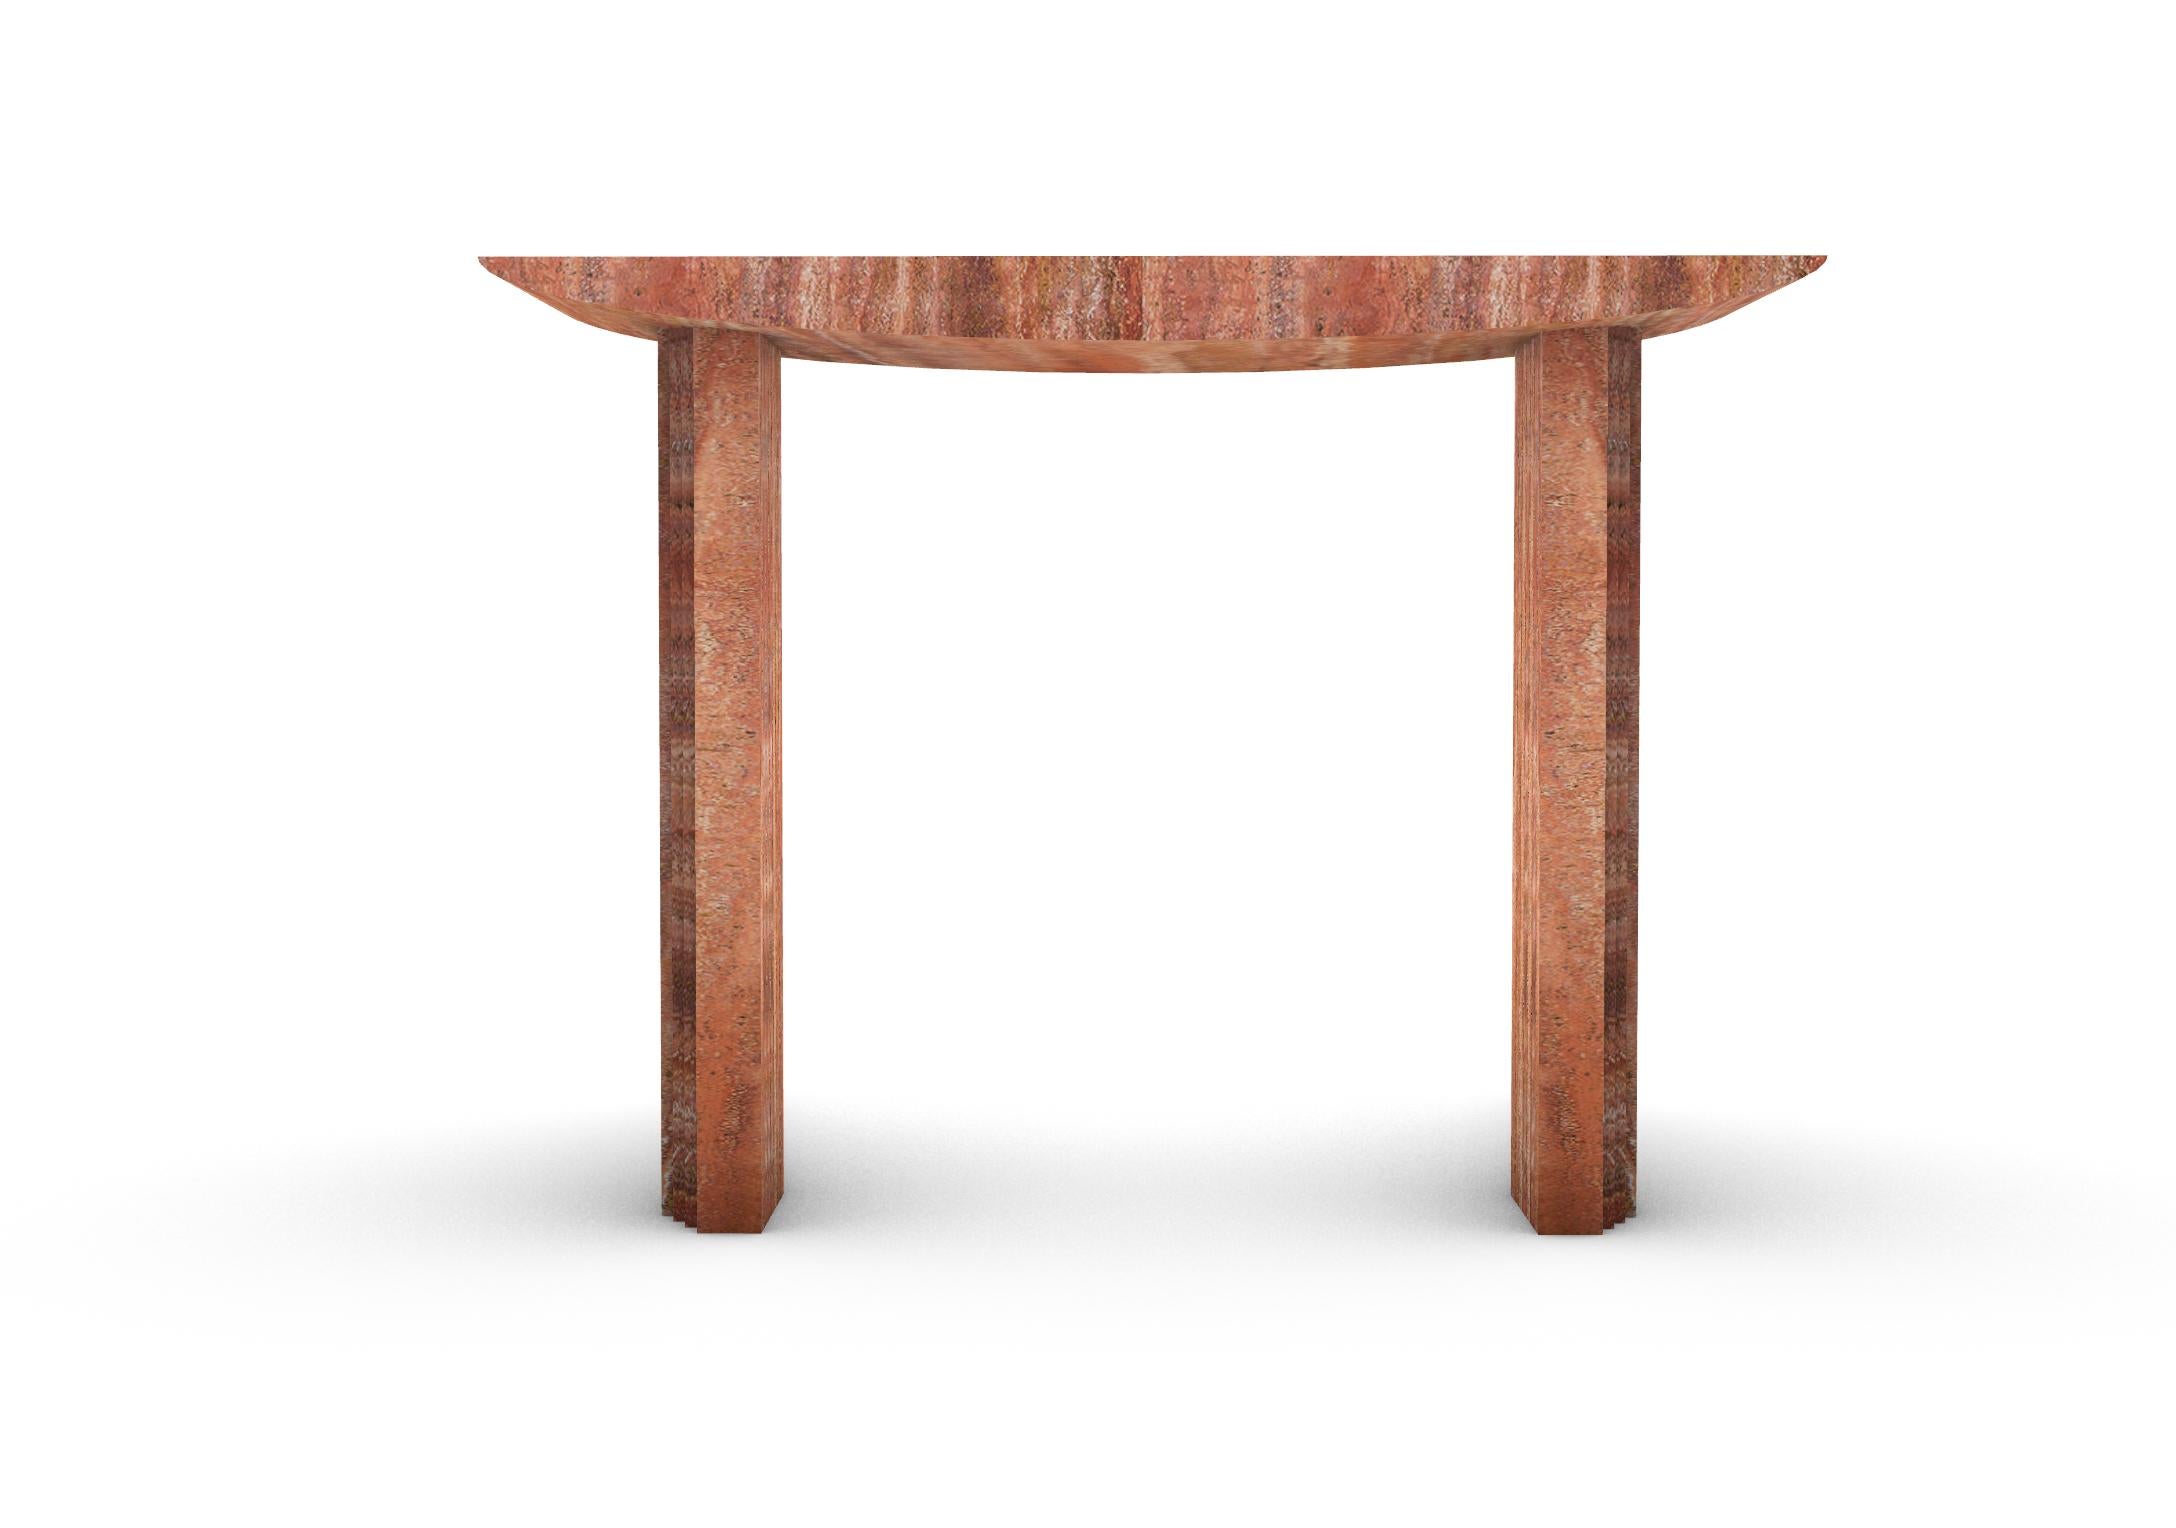 “Console 0024c” is a sculptural console table  in Red Travertine created by the artist Desia Ava. 
The piece features strong lines and gentle curves. Marked by architectural aesthetics, on the borderline between sculpture and furniture the